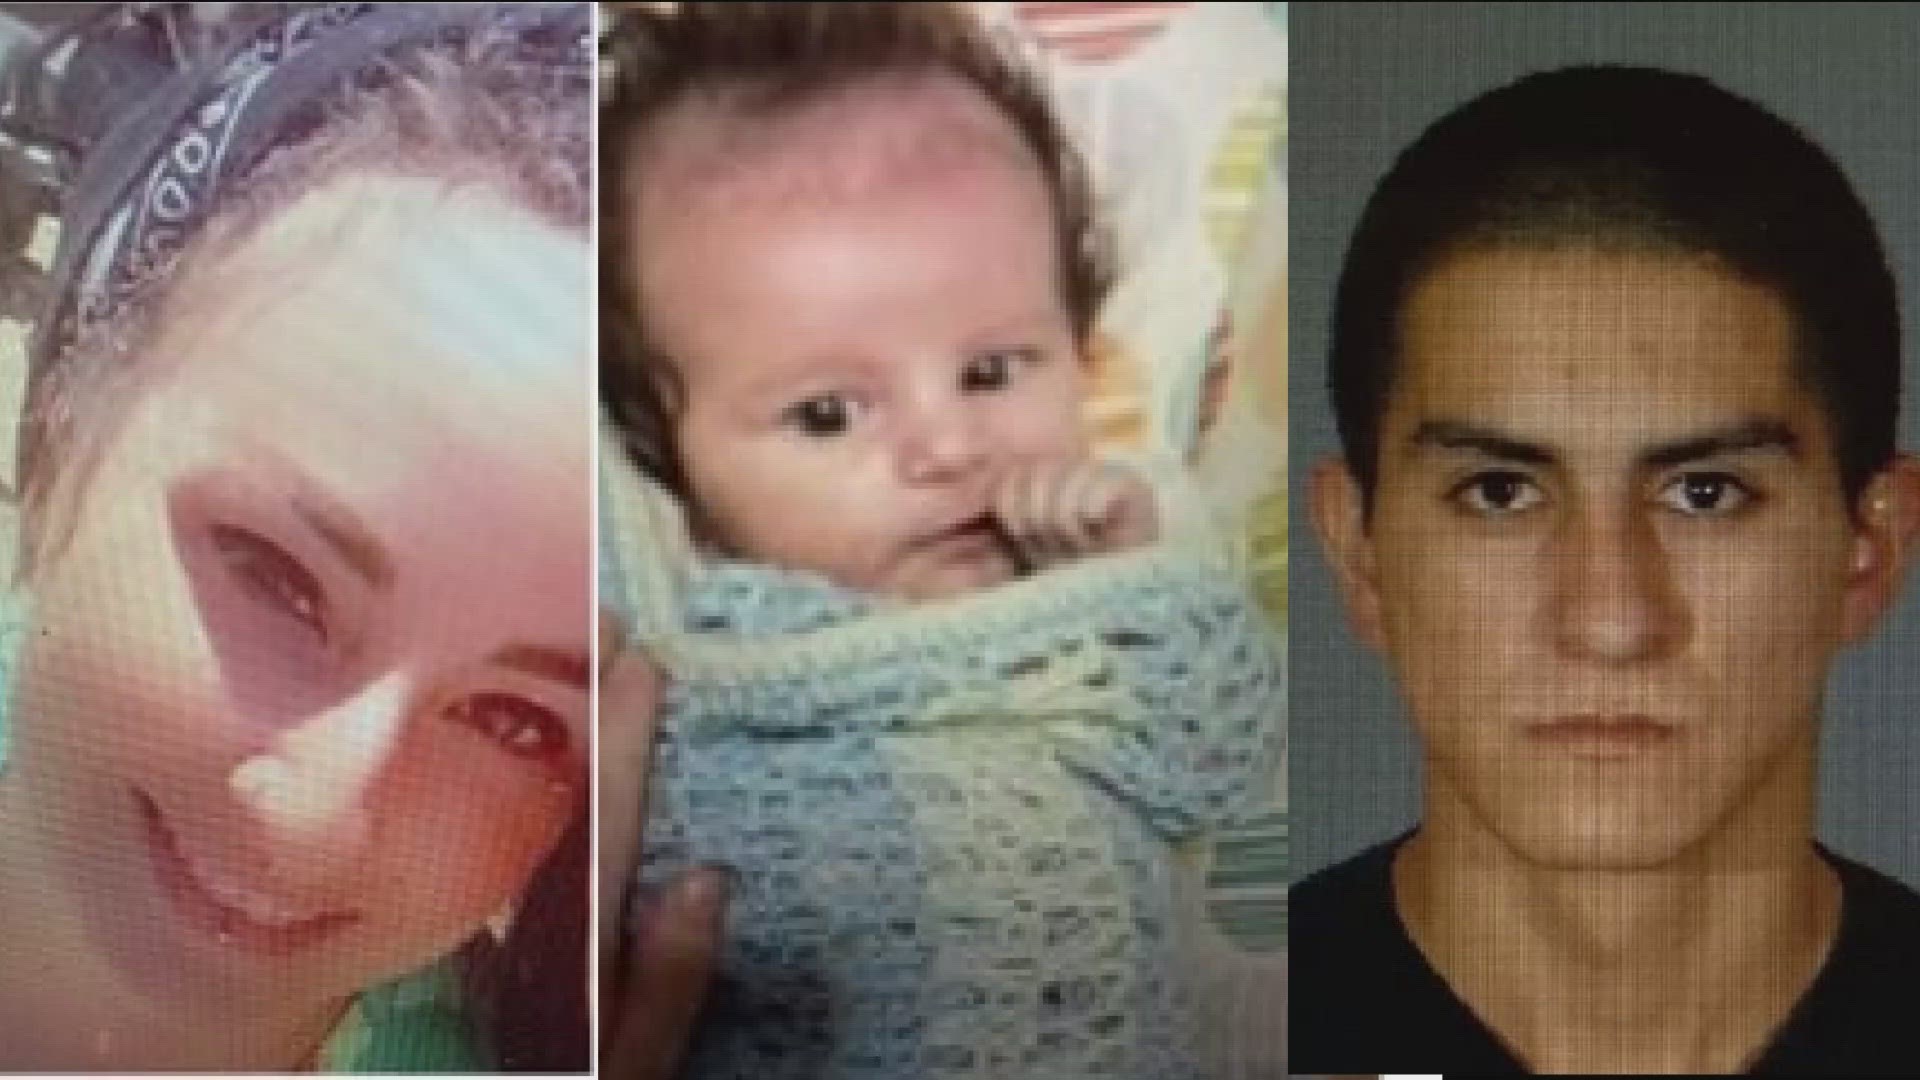 The California Highway Patrol activated an Amber Alert for an armed man who is suspected of kidnapping his wife and infant daughter in Lancaster.